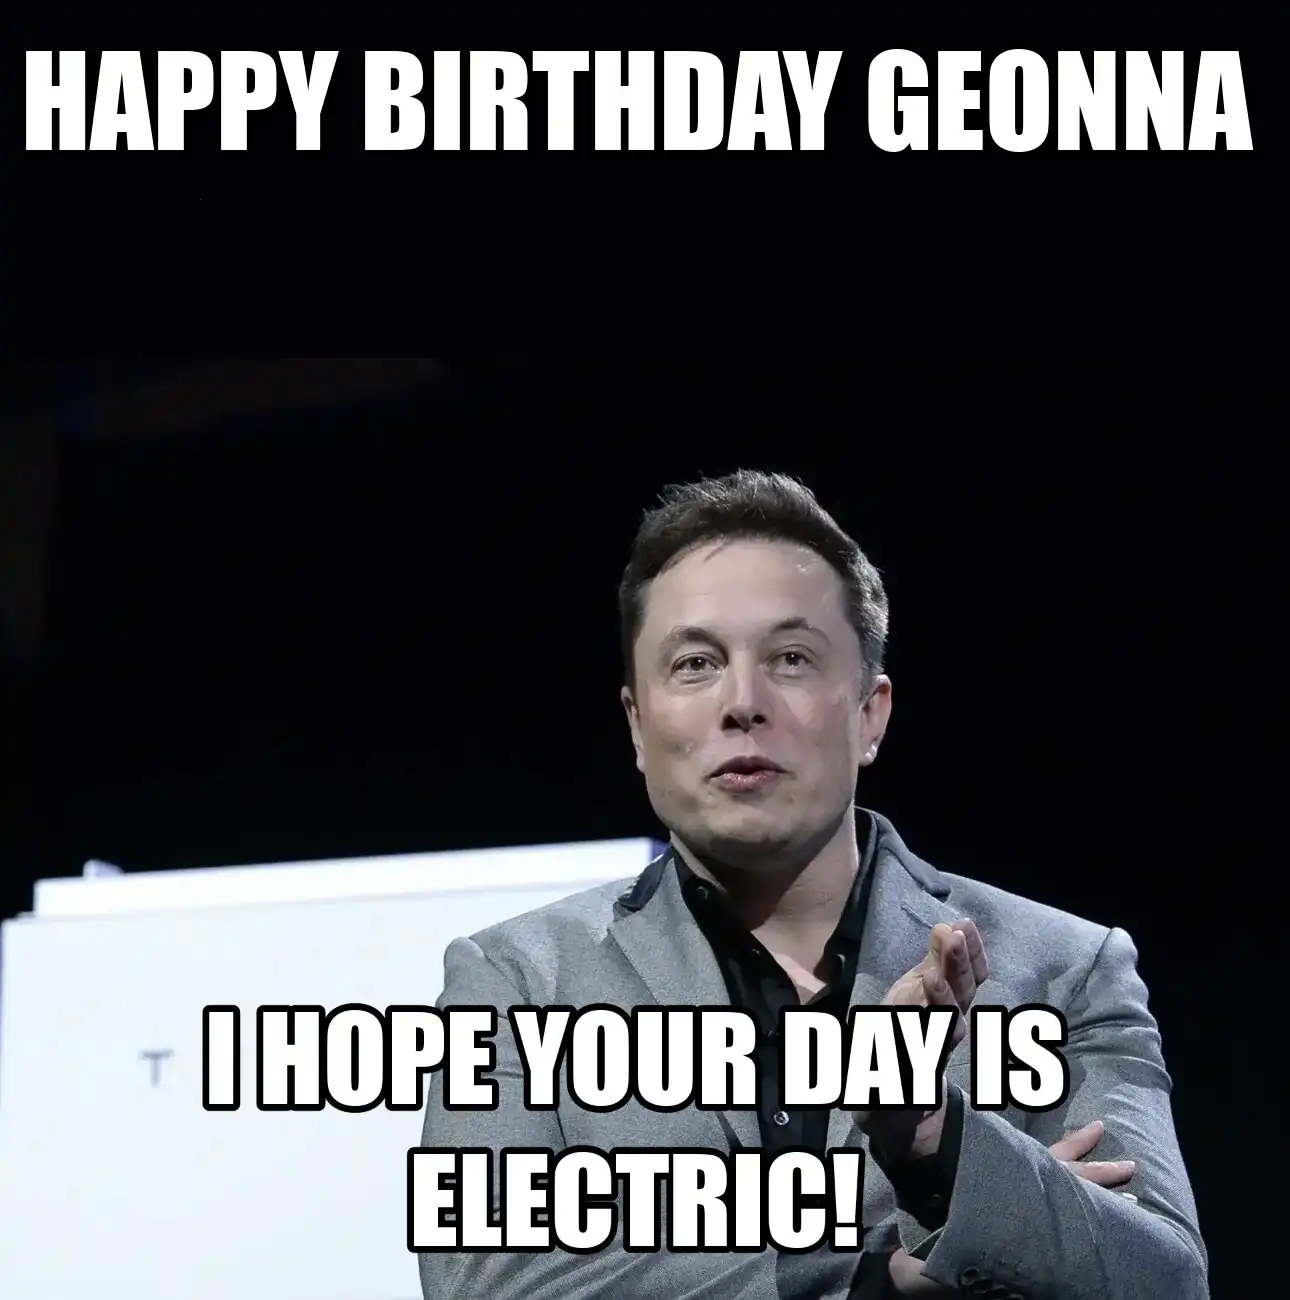 Happy Birthday Geonna I Hope Your Day Is Electric Meme